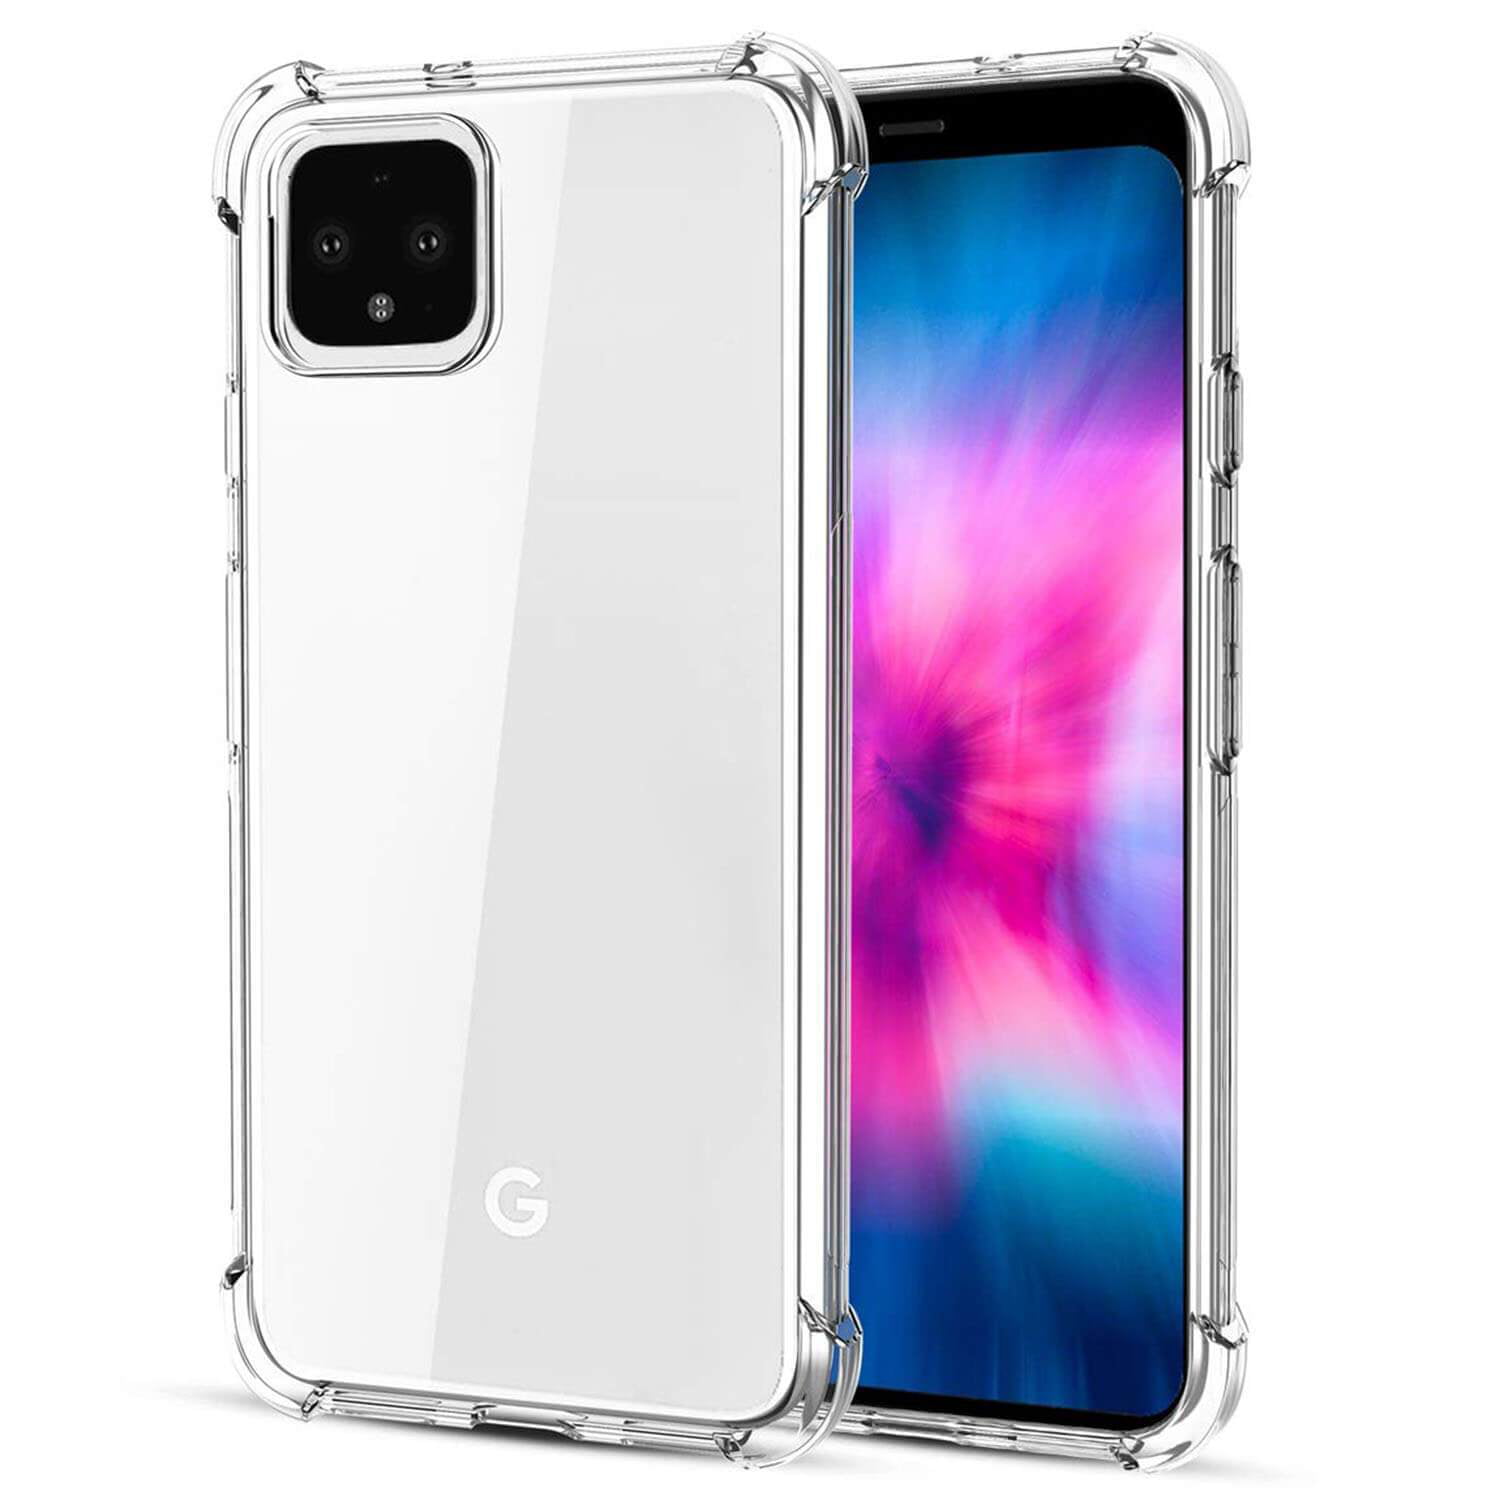 Details about   For Google Pixel 4 3a 3 2 XL Air Cushion Bumper Shockproof TPU Clear Case Cover